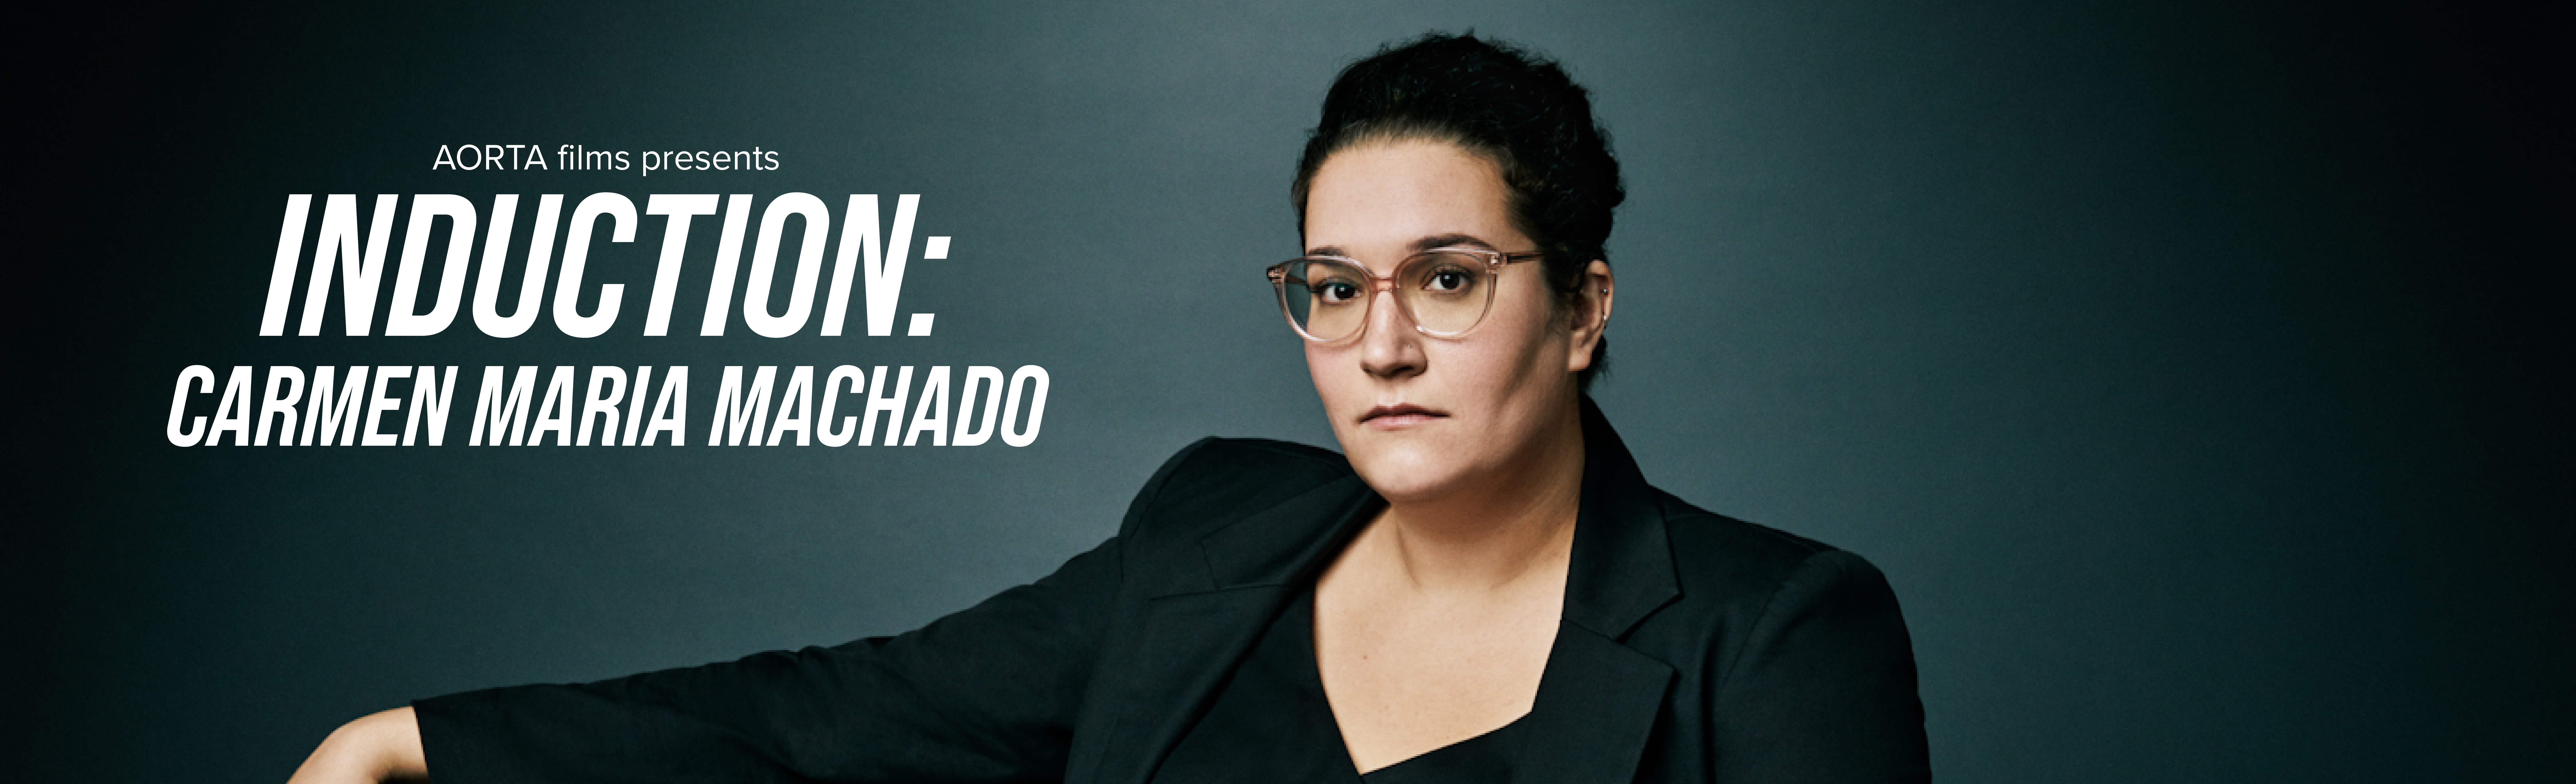 AORTA films announces award-winning author Carmen Maria Machado as the inaugural guest artist in the queer porn studio's new Induction Series